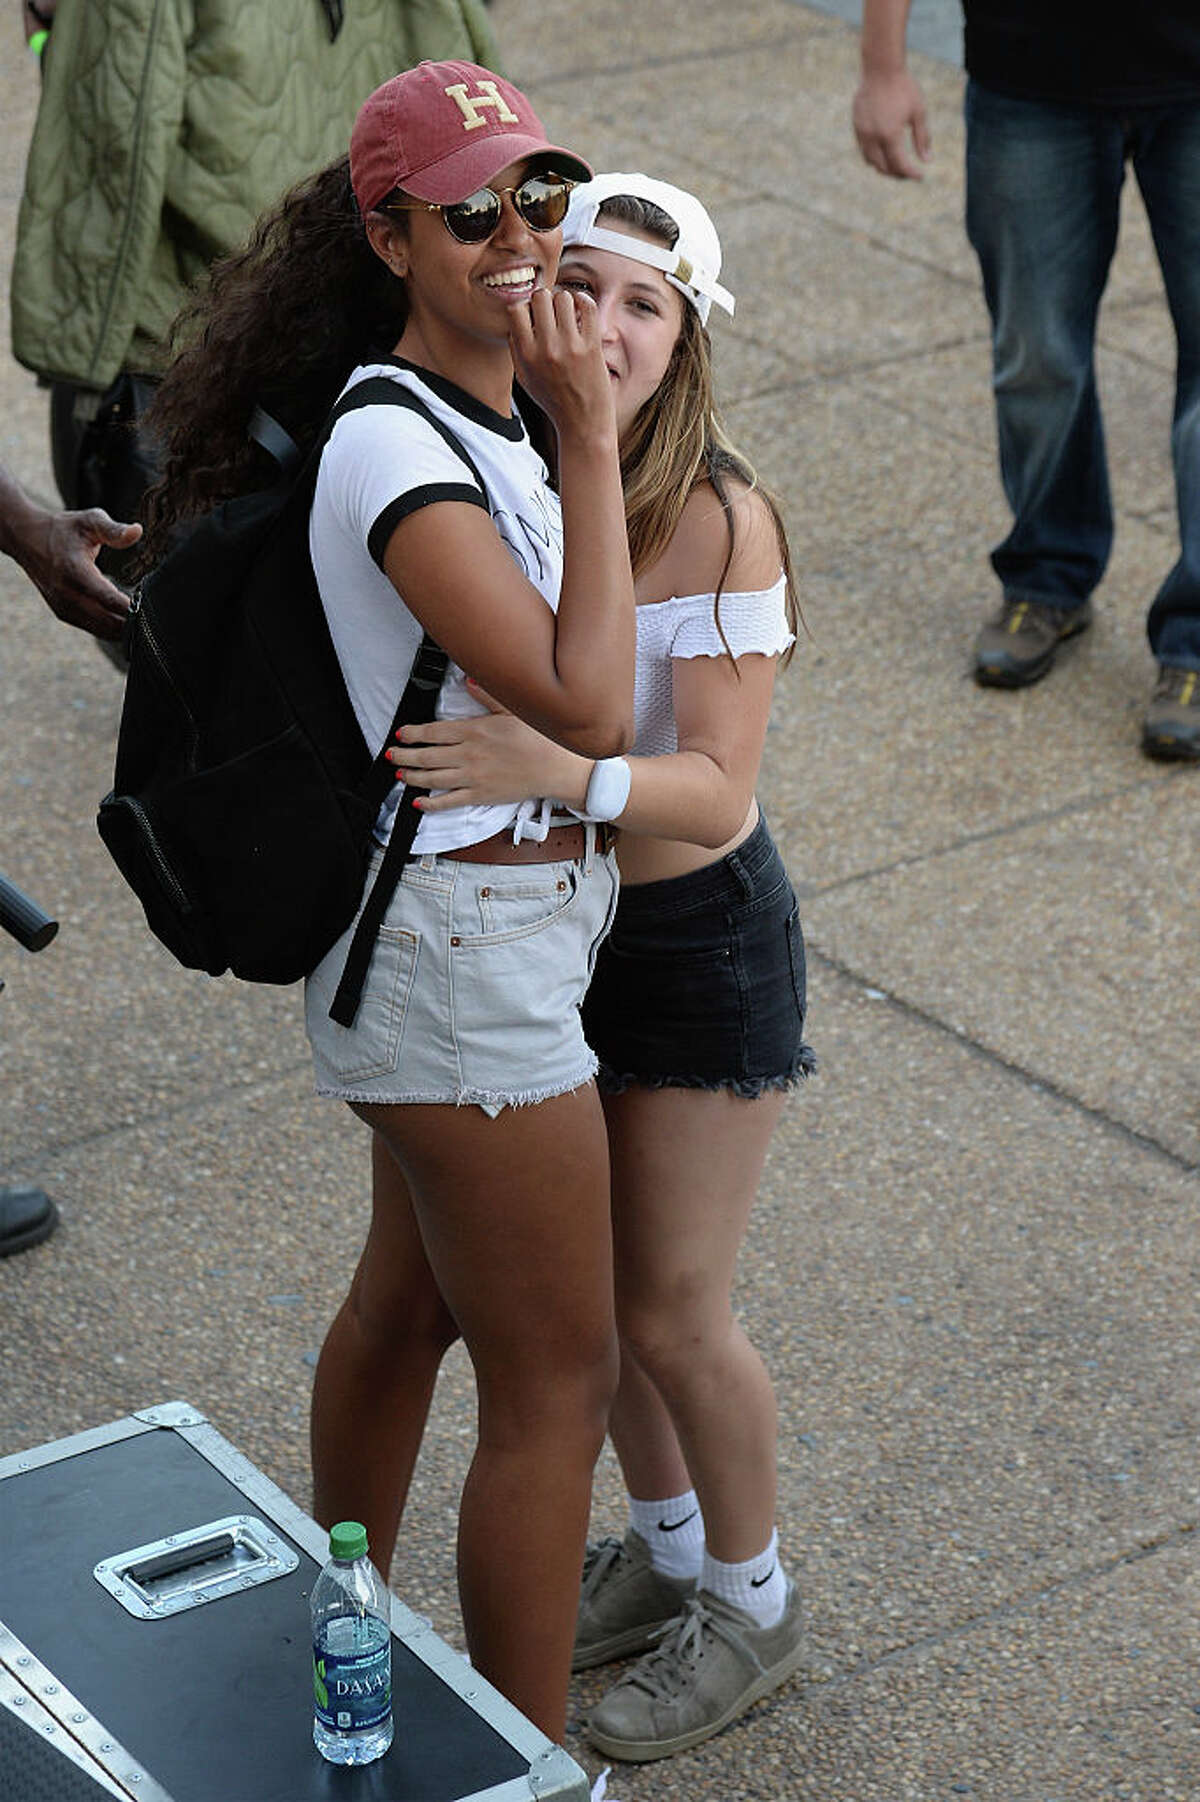 Malia Obama (L) and a friend attend the 2016 Budweiser Made in America Festival at Benjamin Franklin Parkway on September 4, 2016 in Philadelphia, Pennsylvania.Keep clicking to see more photos from the 2016 Budweiser Made in America Festival.